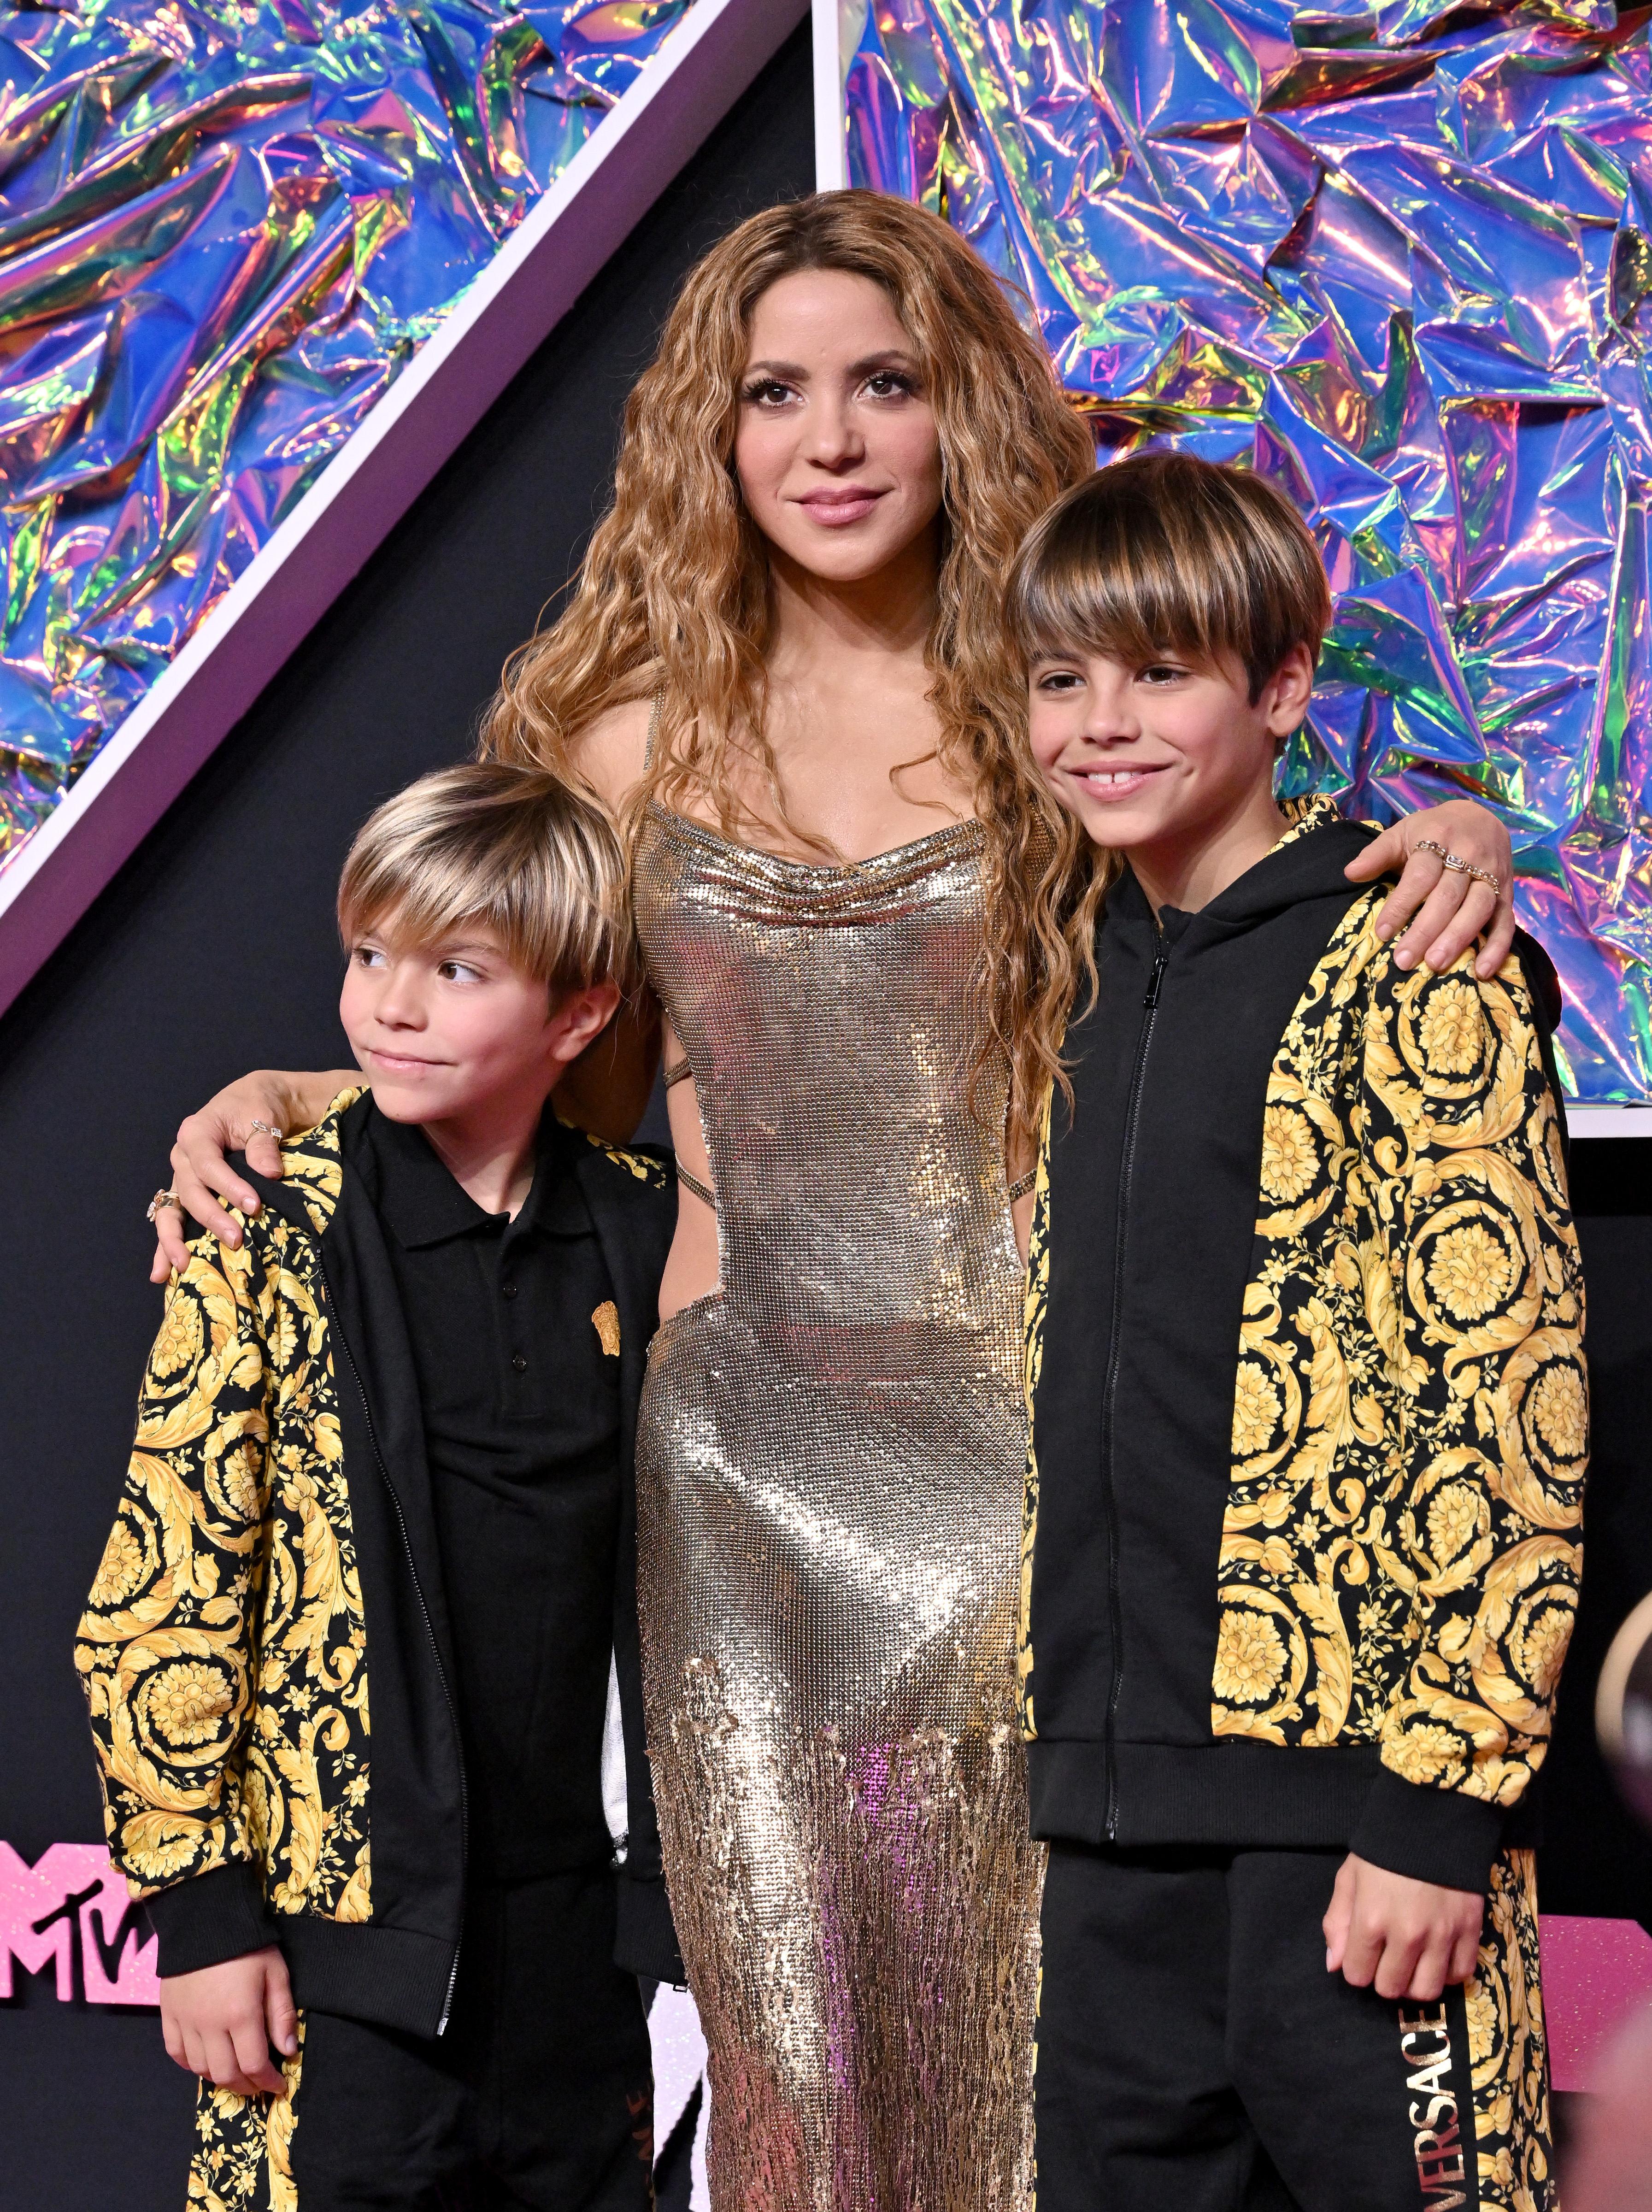 Sasha Piqué, Shakira, and Milan Piqué at the 2023 MTV Video Music Awards on September 12, 2023 in Newark, New Jersey. | Source: Getty Images